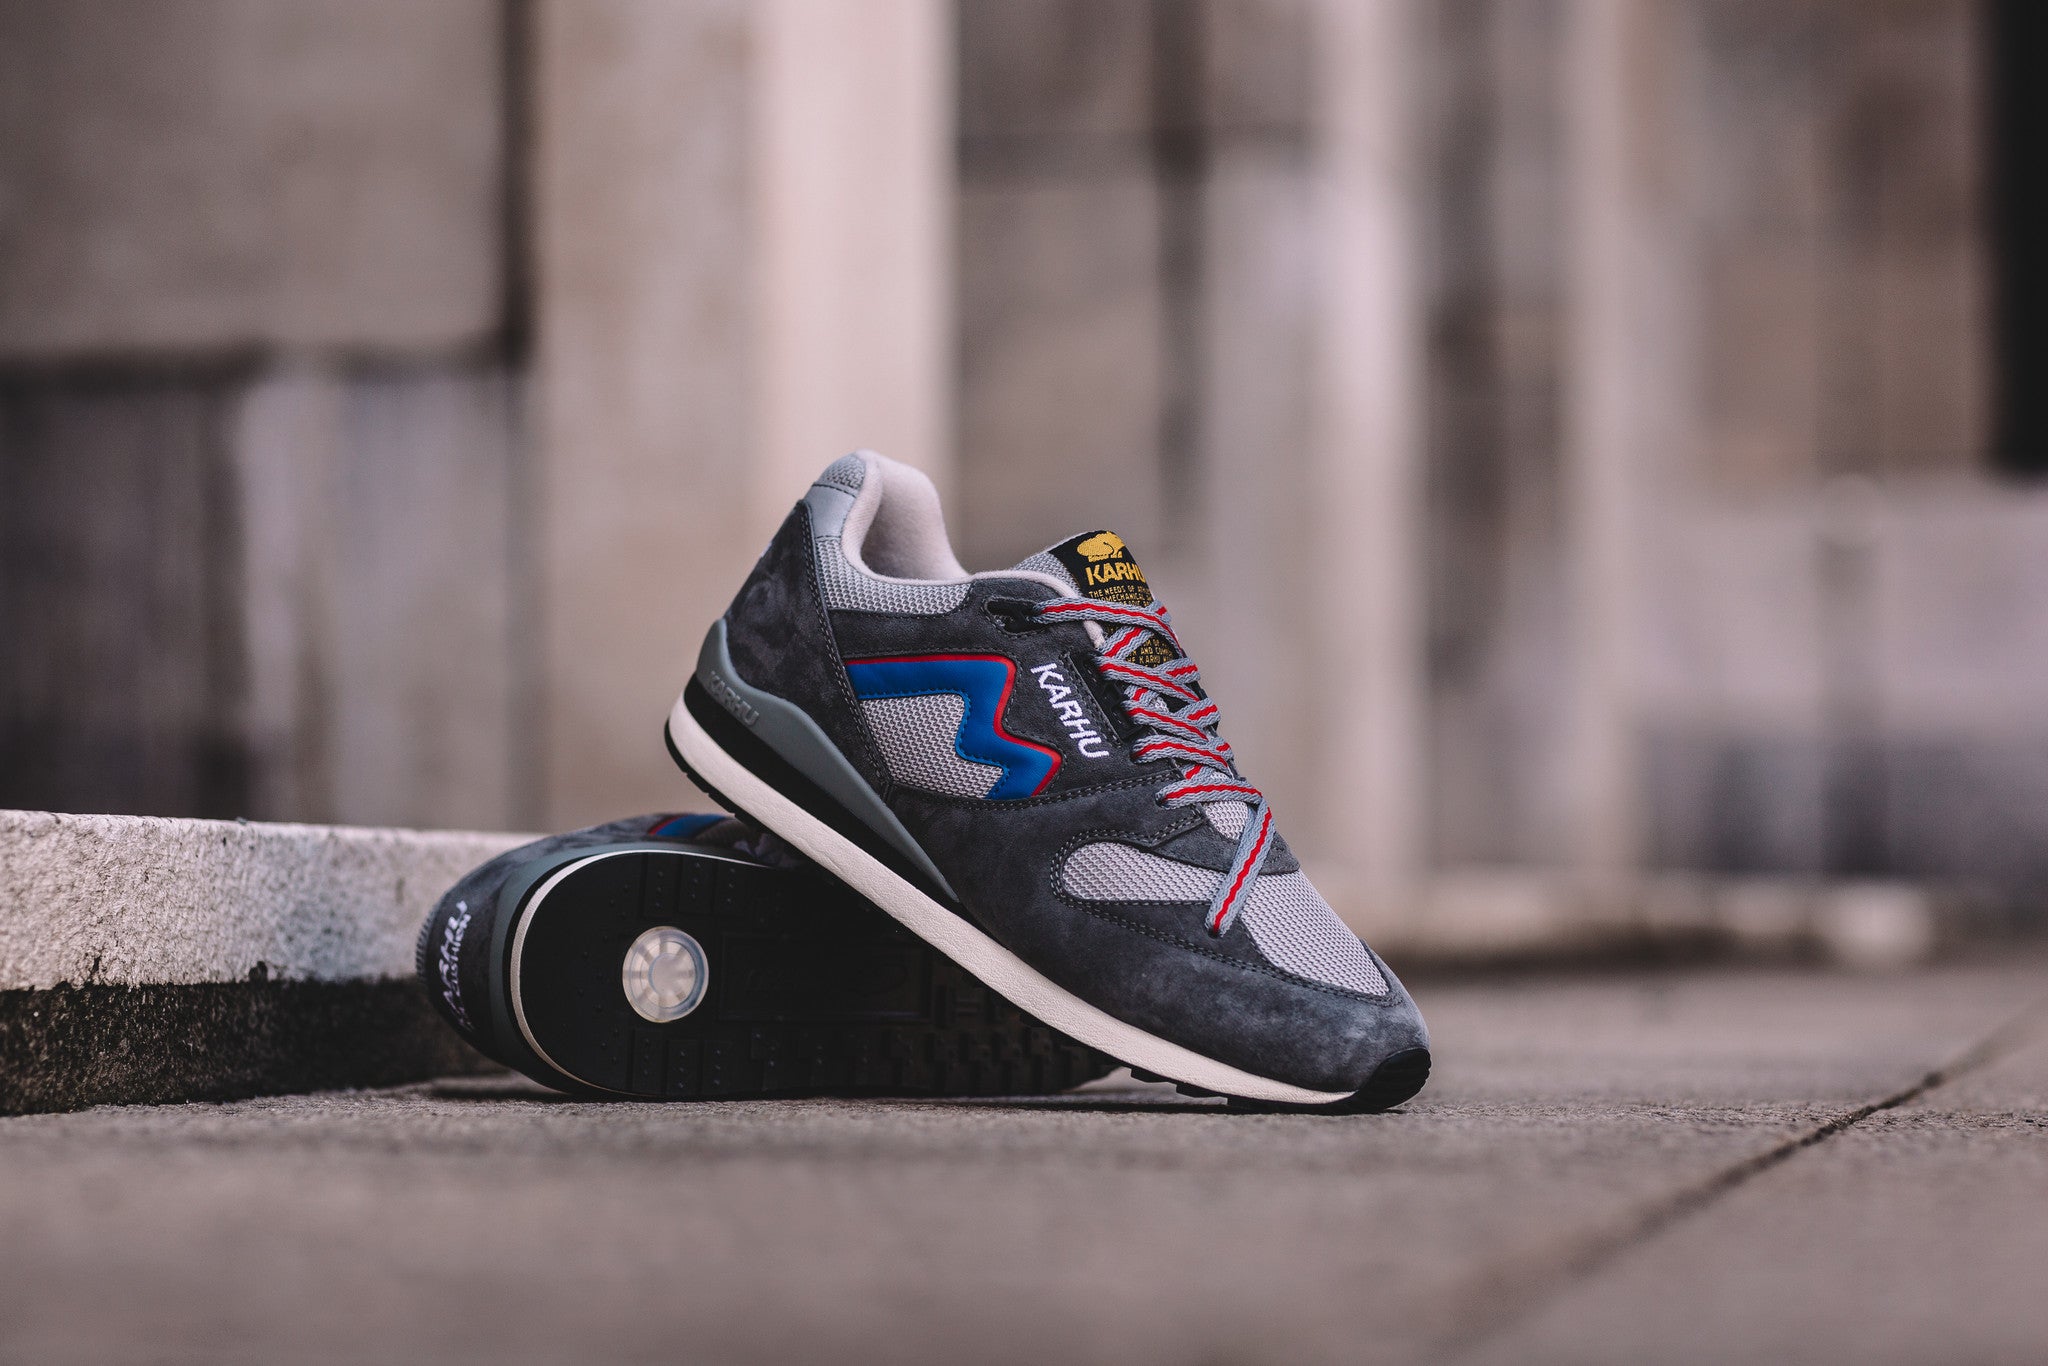 Relaunch | of Karhu’s Synchron Classic Style in its Original Colors